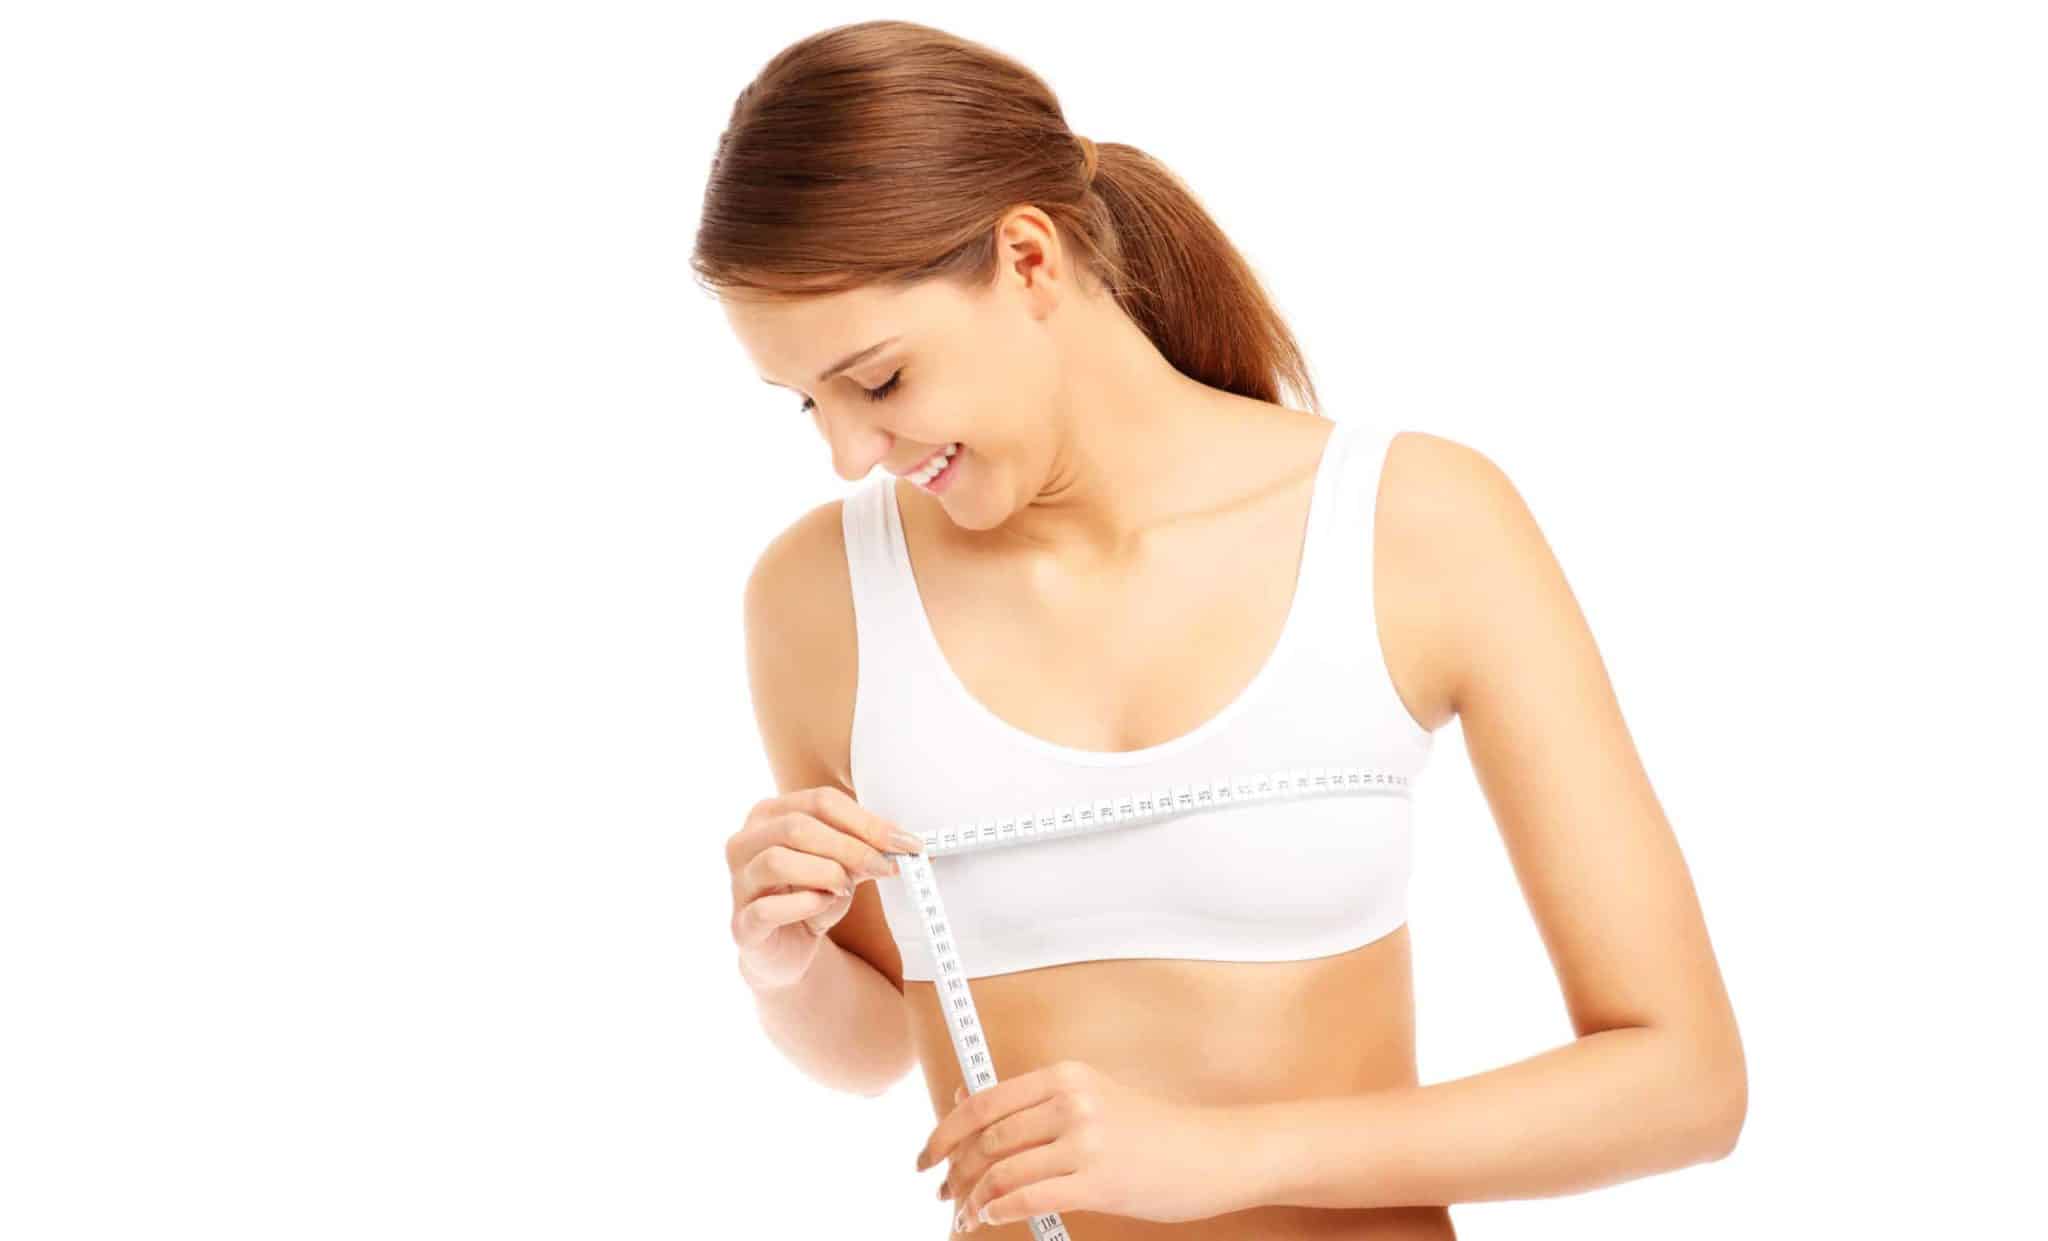 April Aesthetic Medical Clinic - Tips to improve breast shape